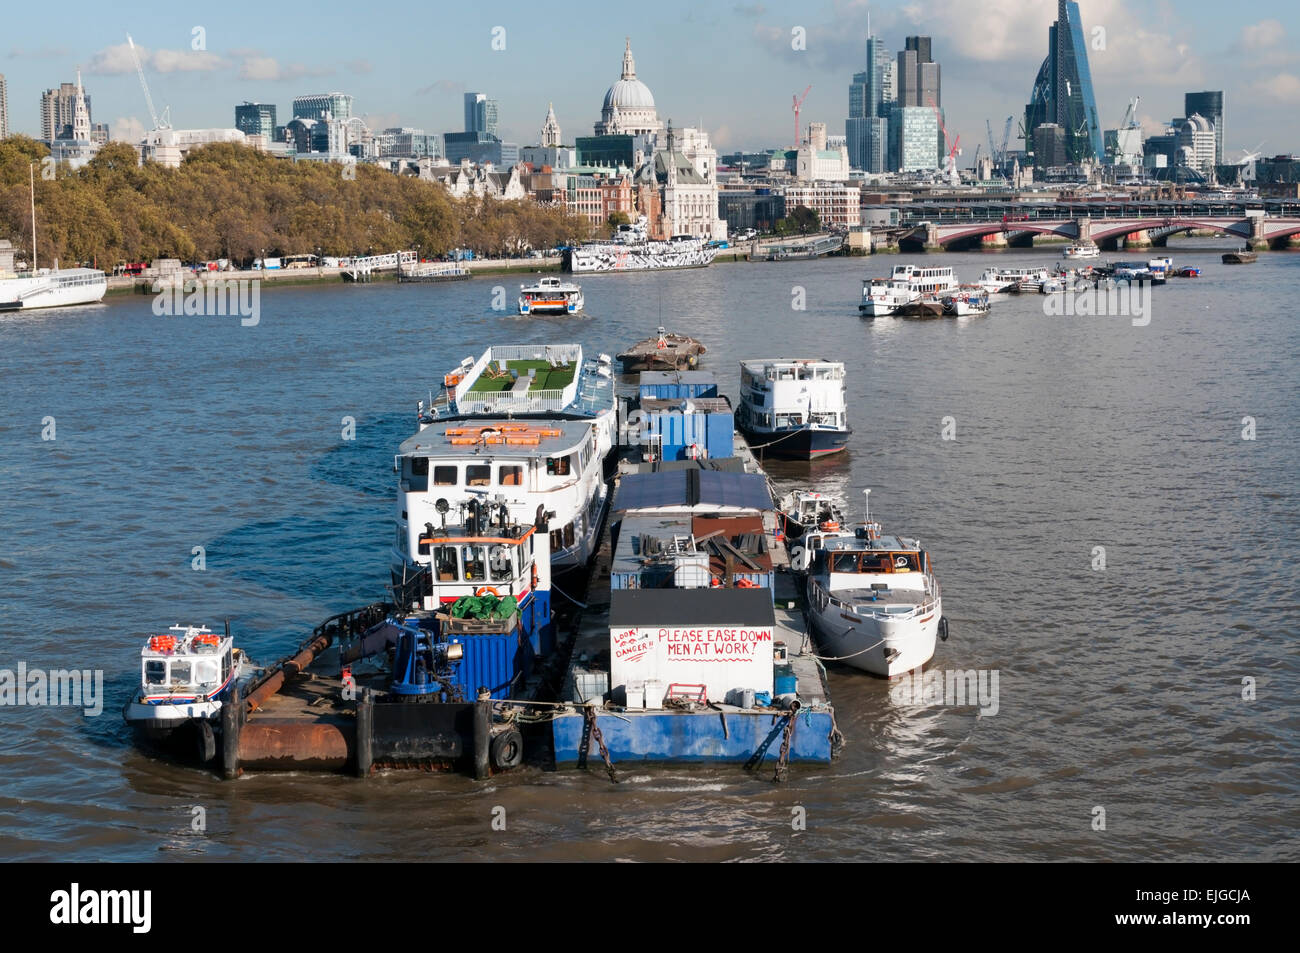 The River Thames in central London viewed from Waterloo Bridge towards the City. Stock Photo